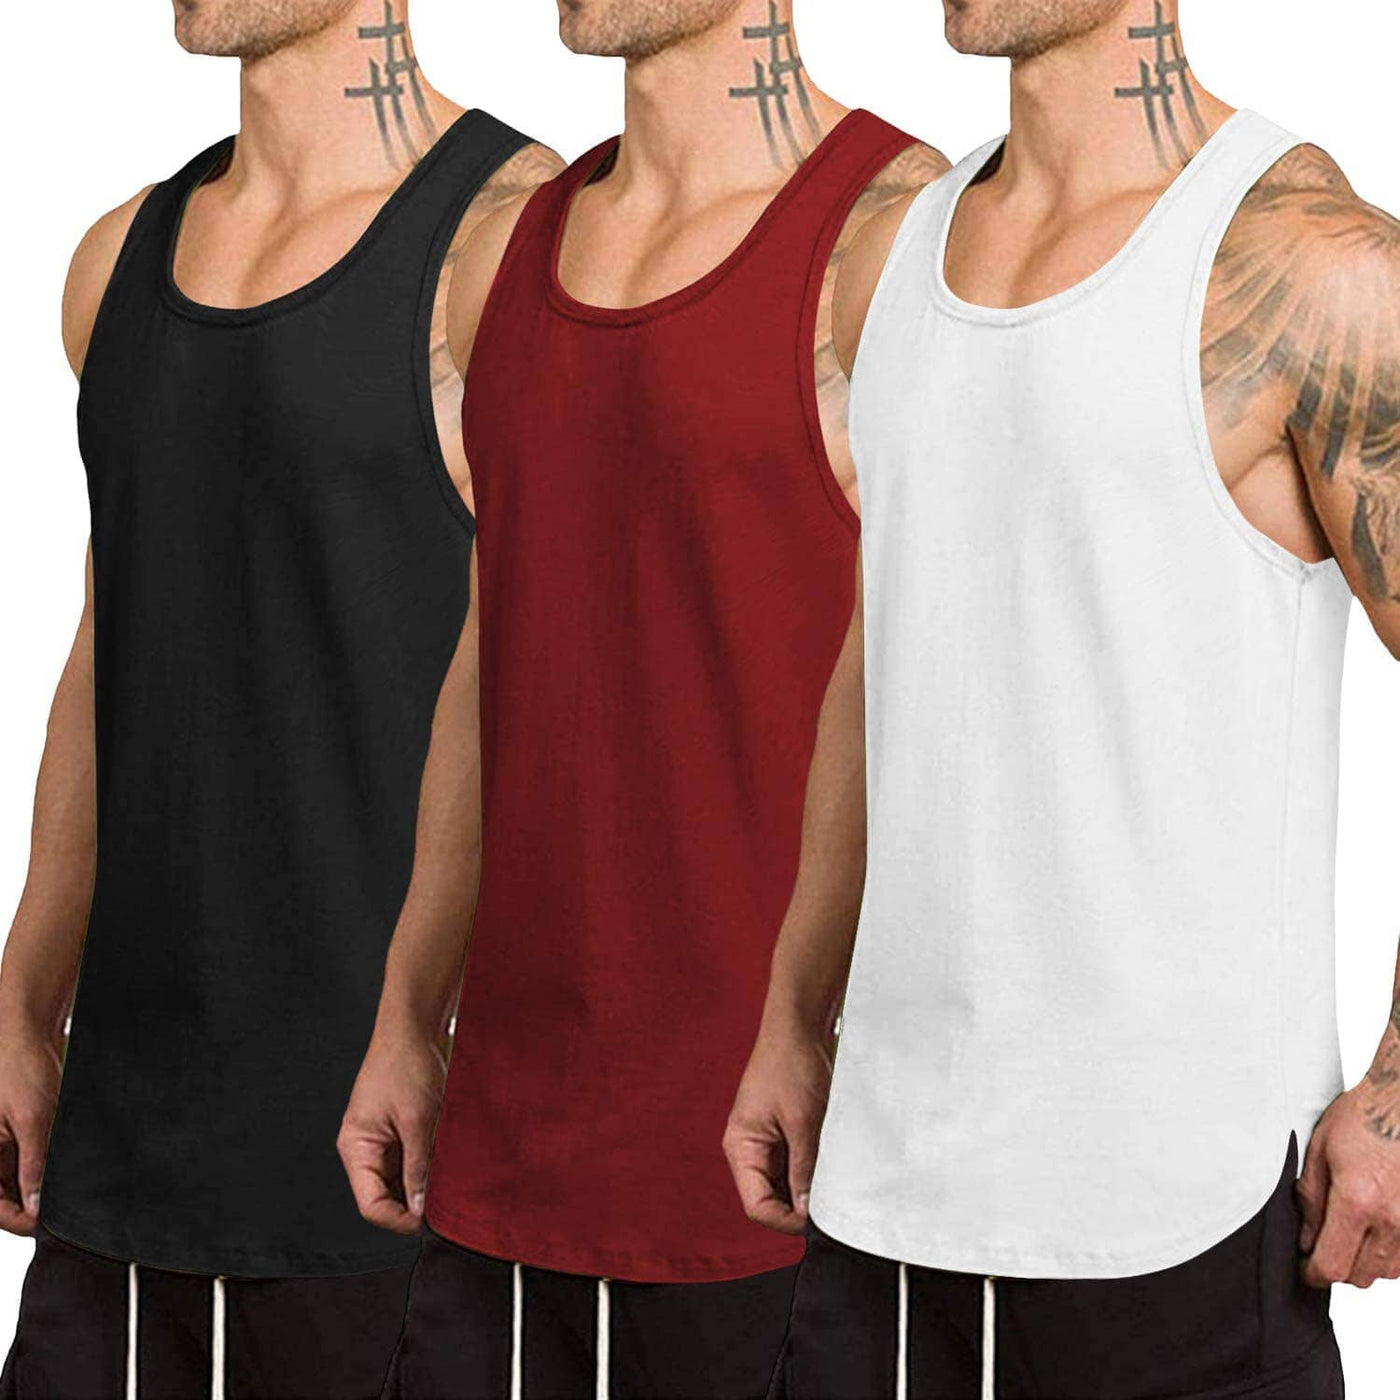 Coofandy 3-Pack Quick Dry Gym Vest (US Only) Tank Tops coofandy Black/Wine Red/White S 